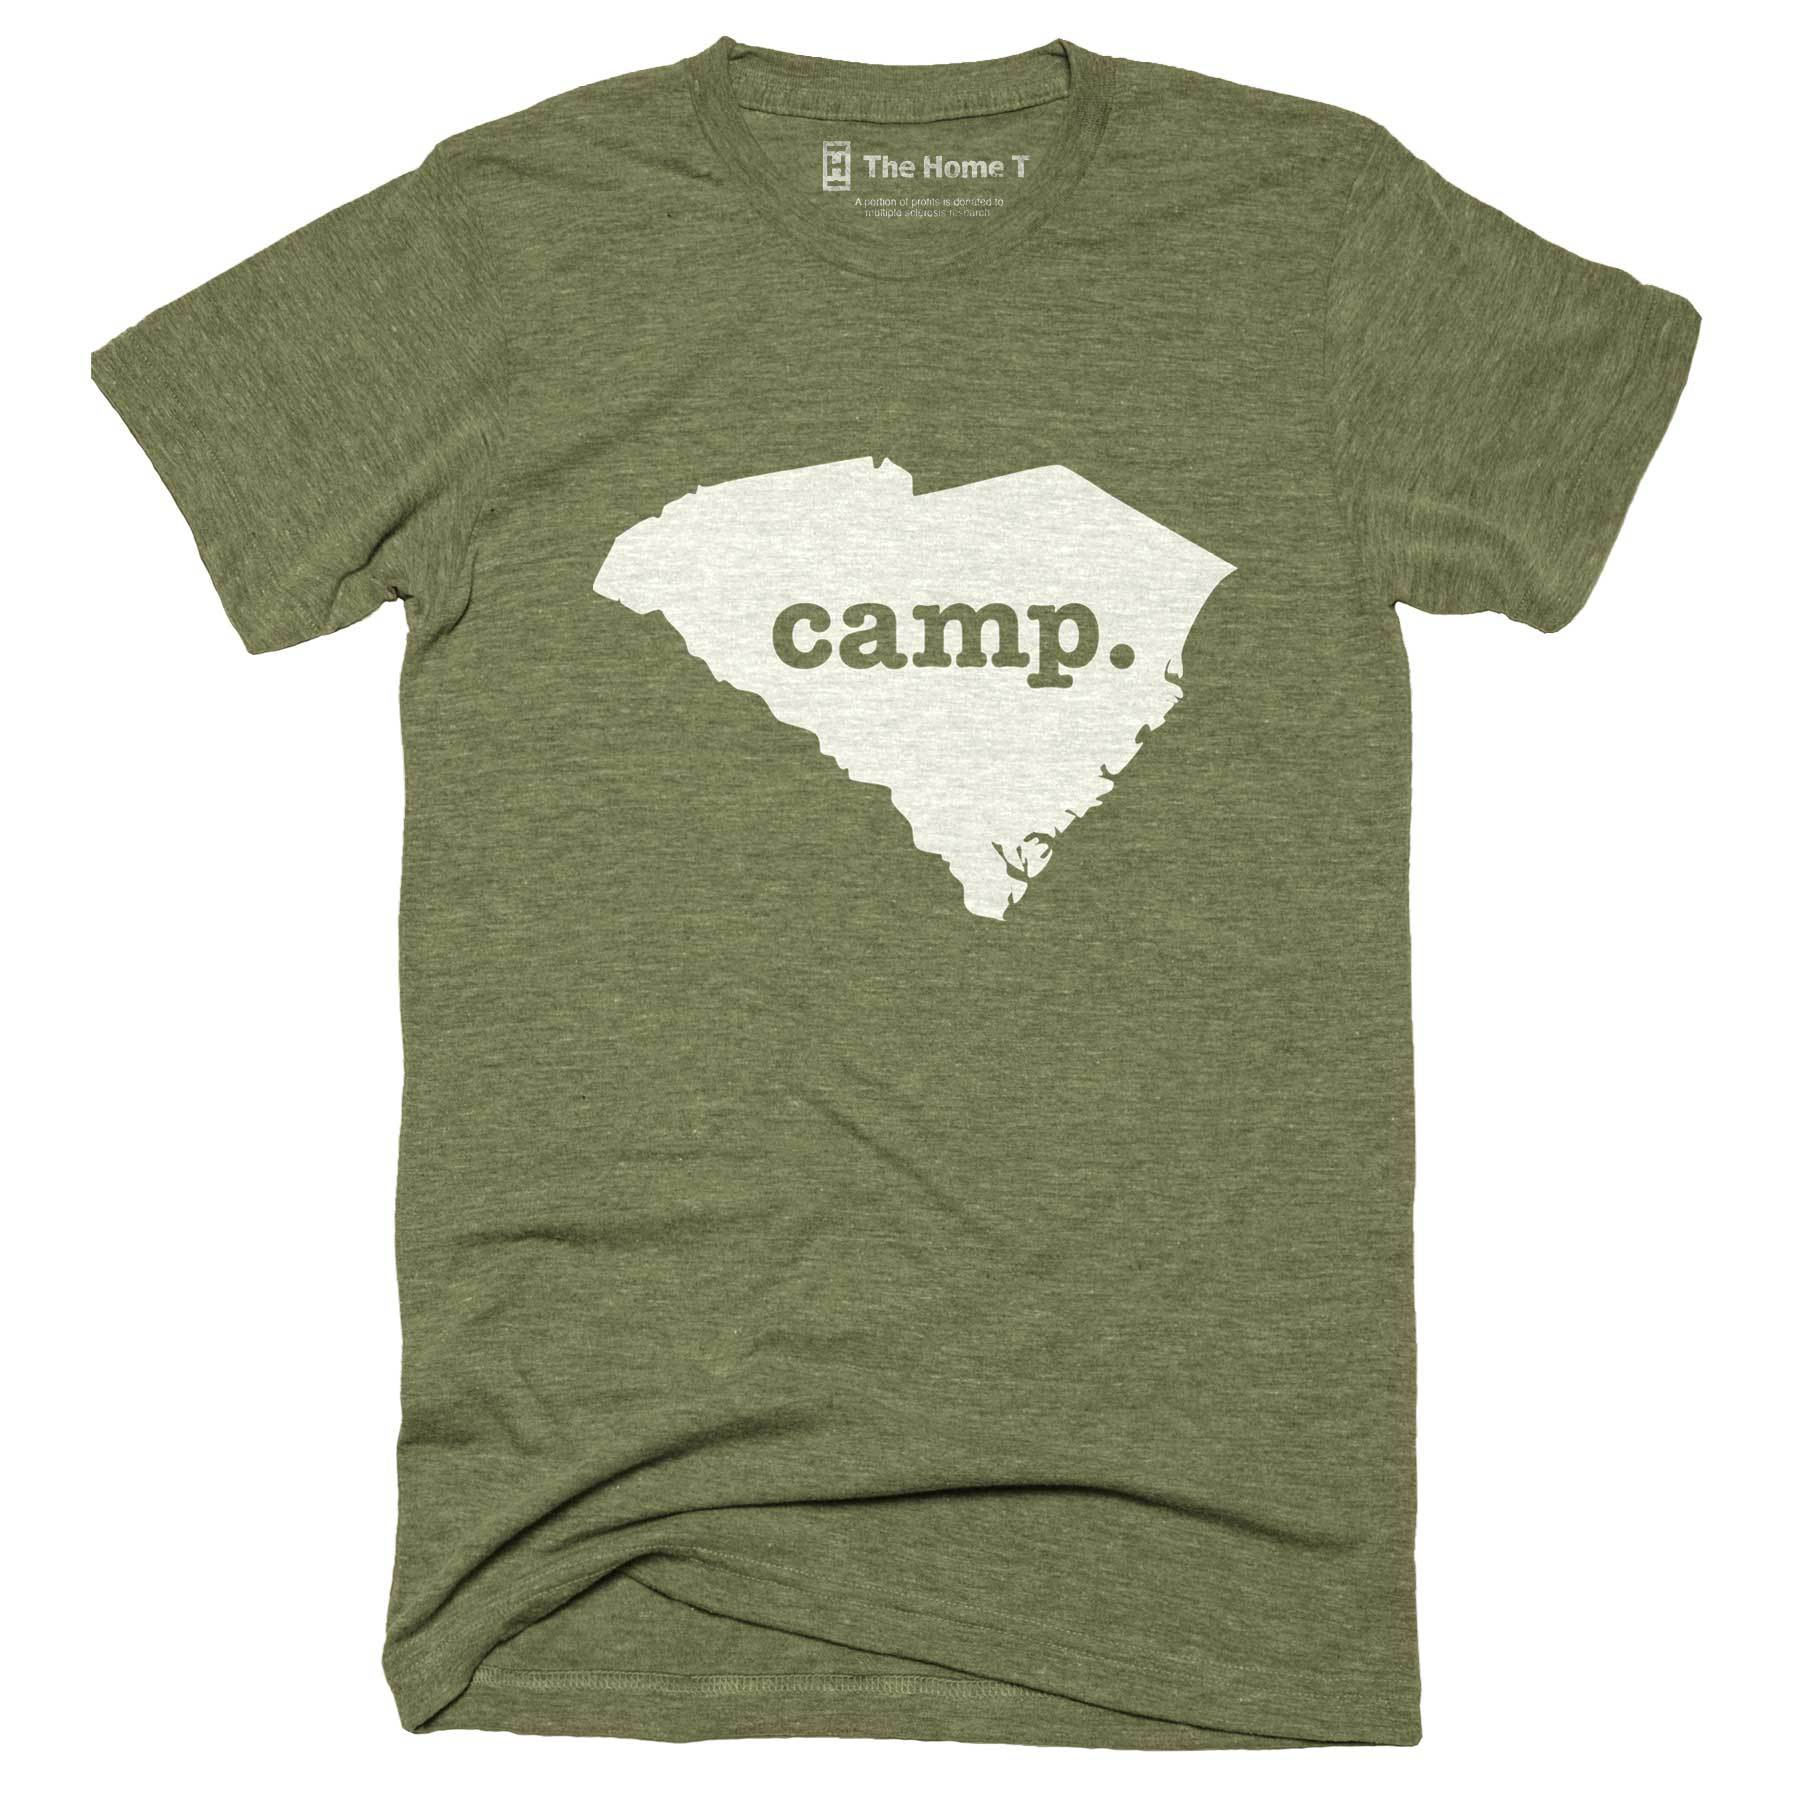 South Carolina Camp Home T-Shirt Outdoor Collection The Home T XXL Army Green